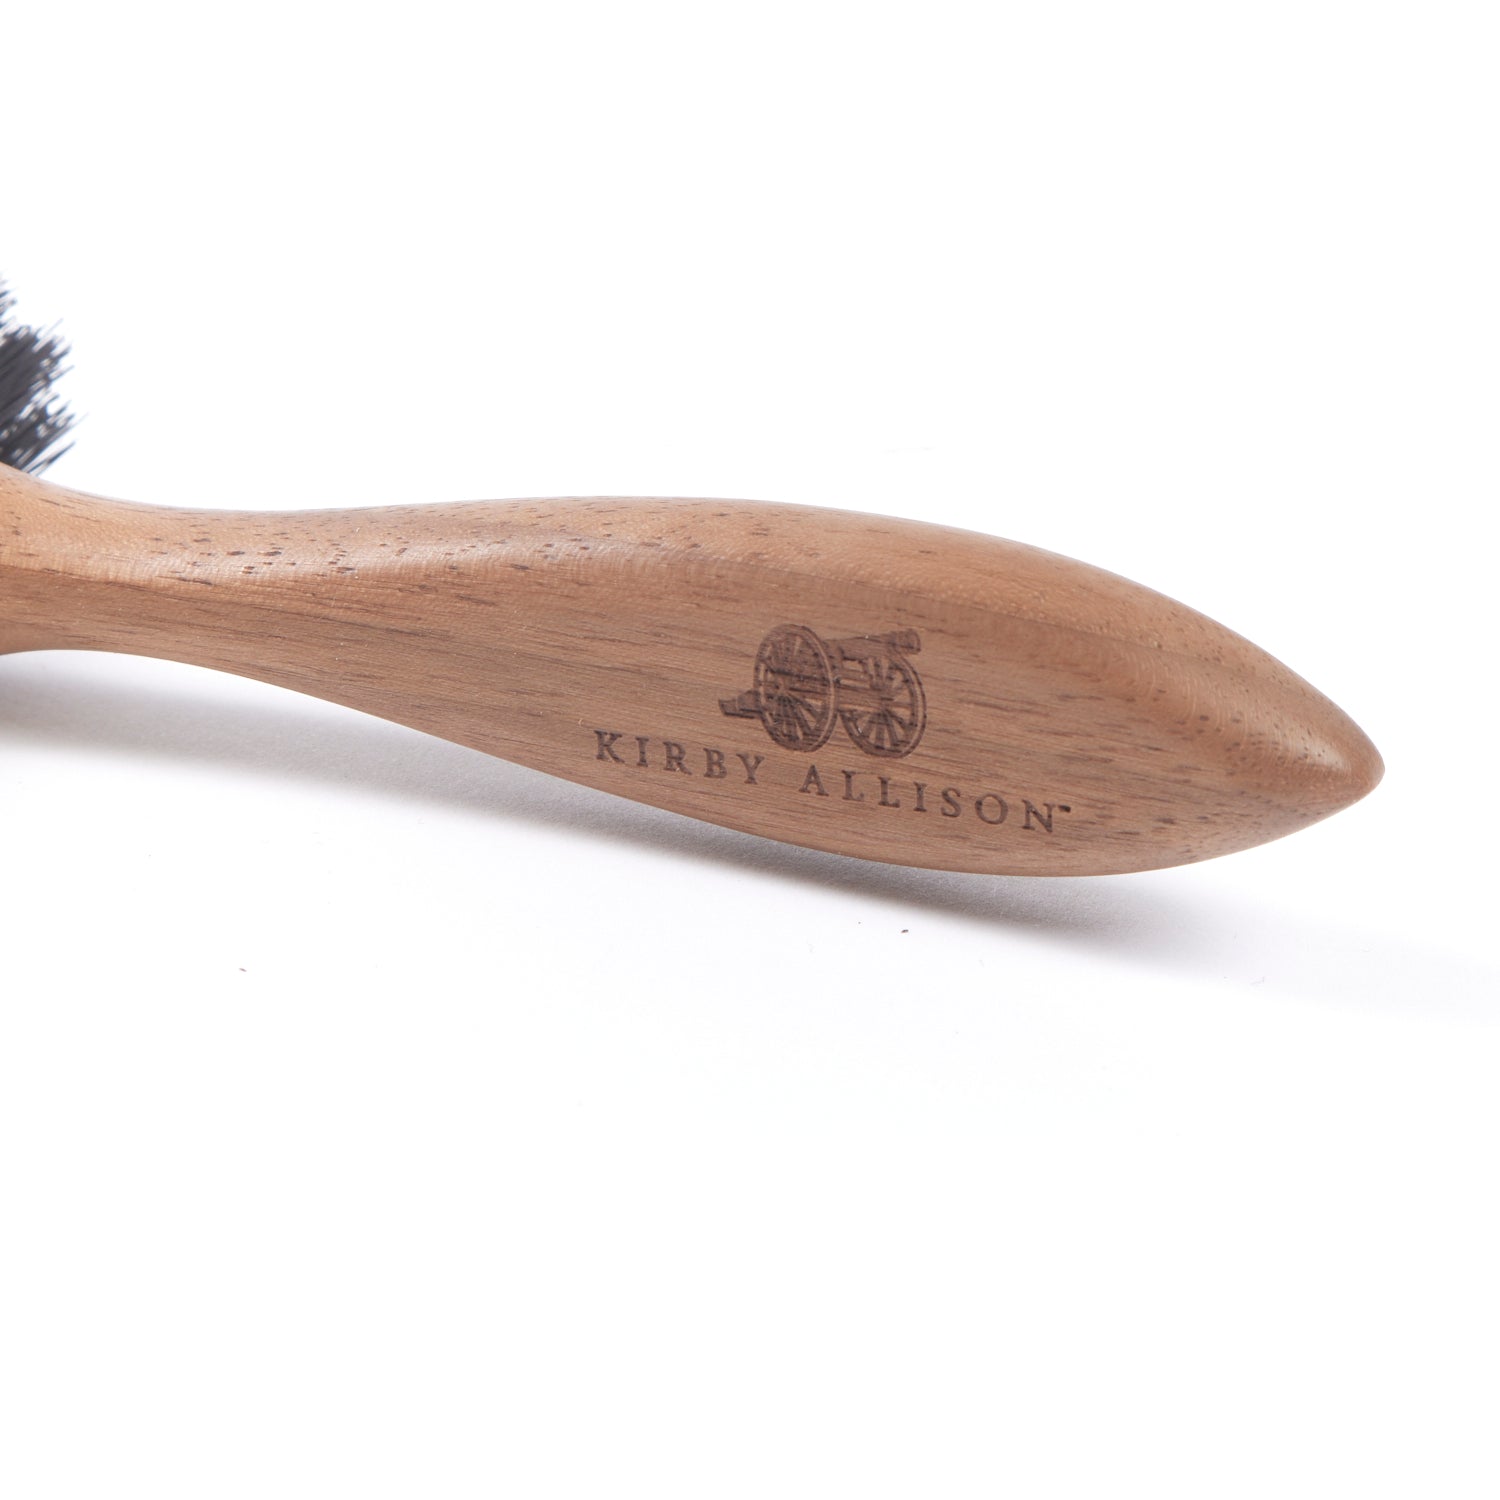 A Kirby Allison Double-Sided Hat Brush made with natural bristles.